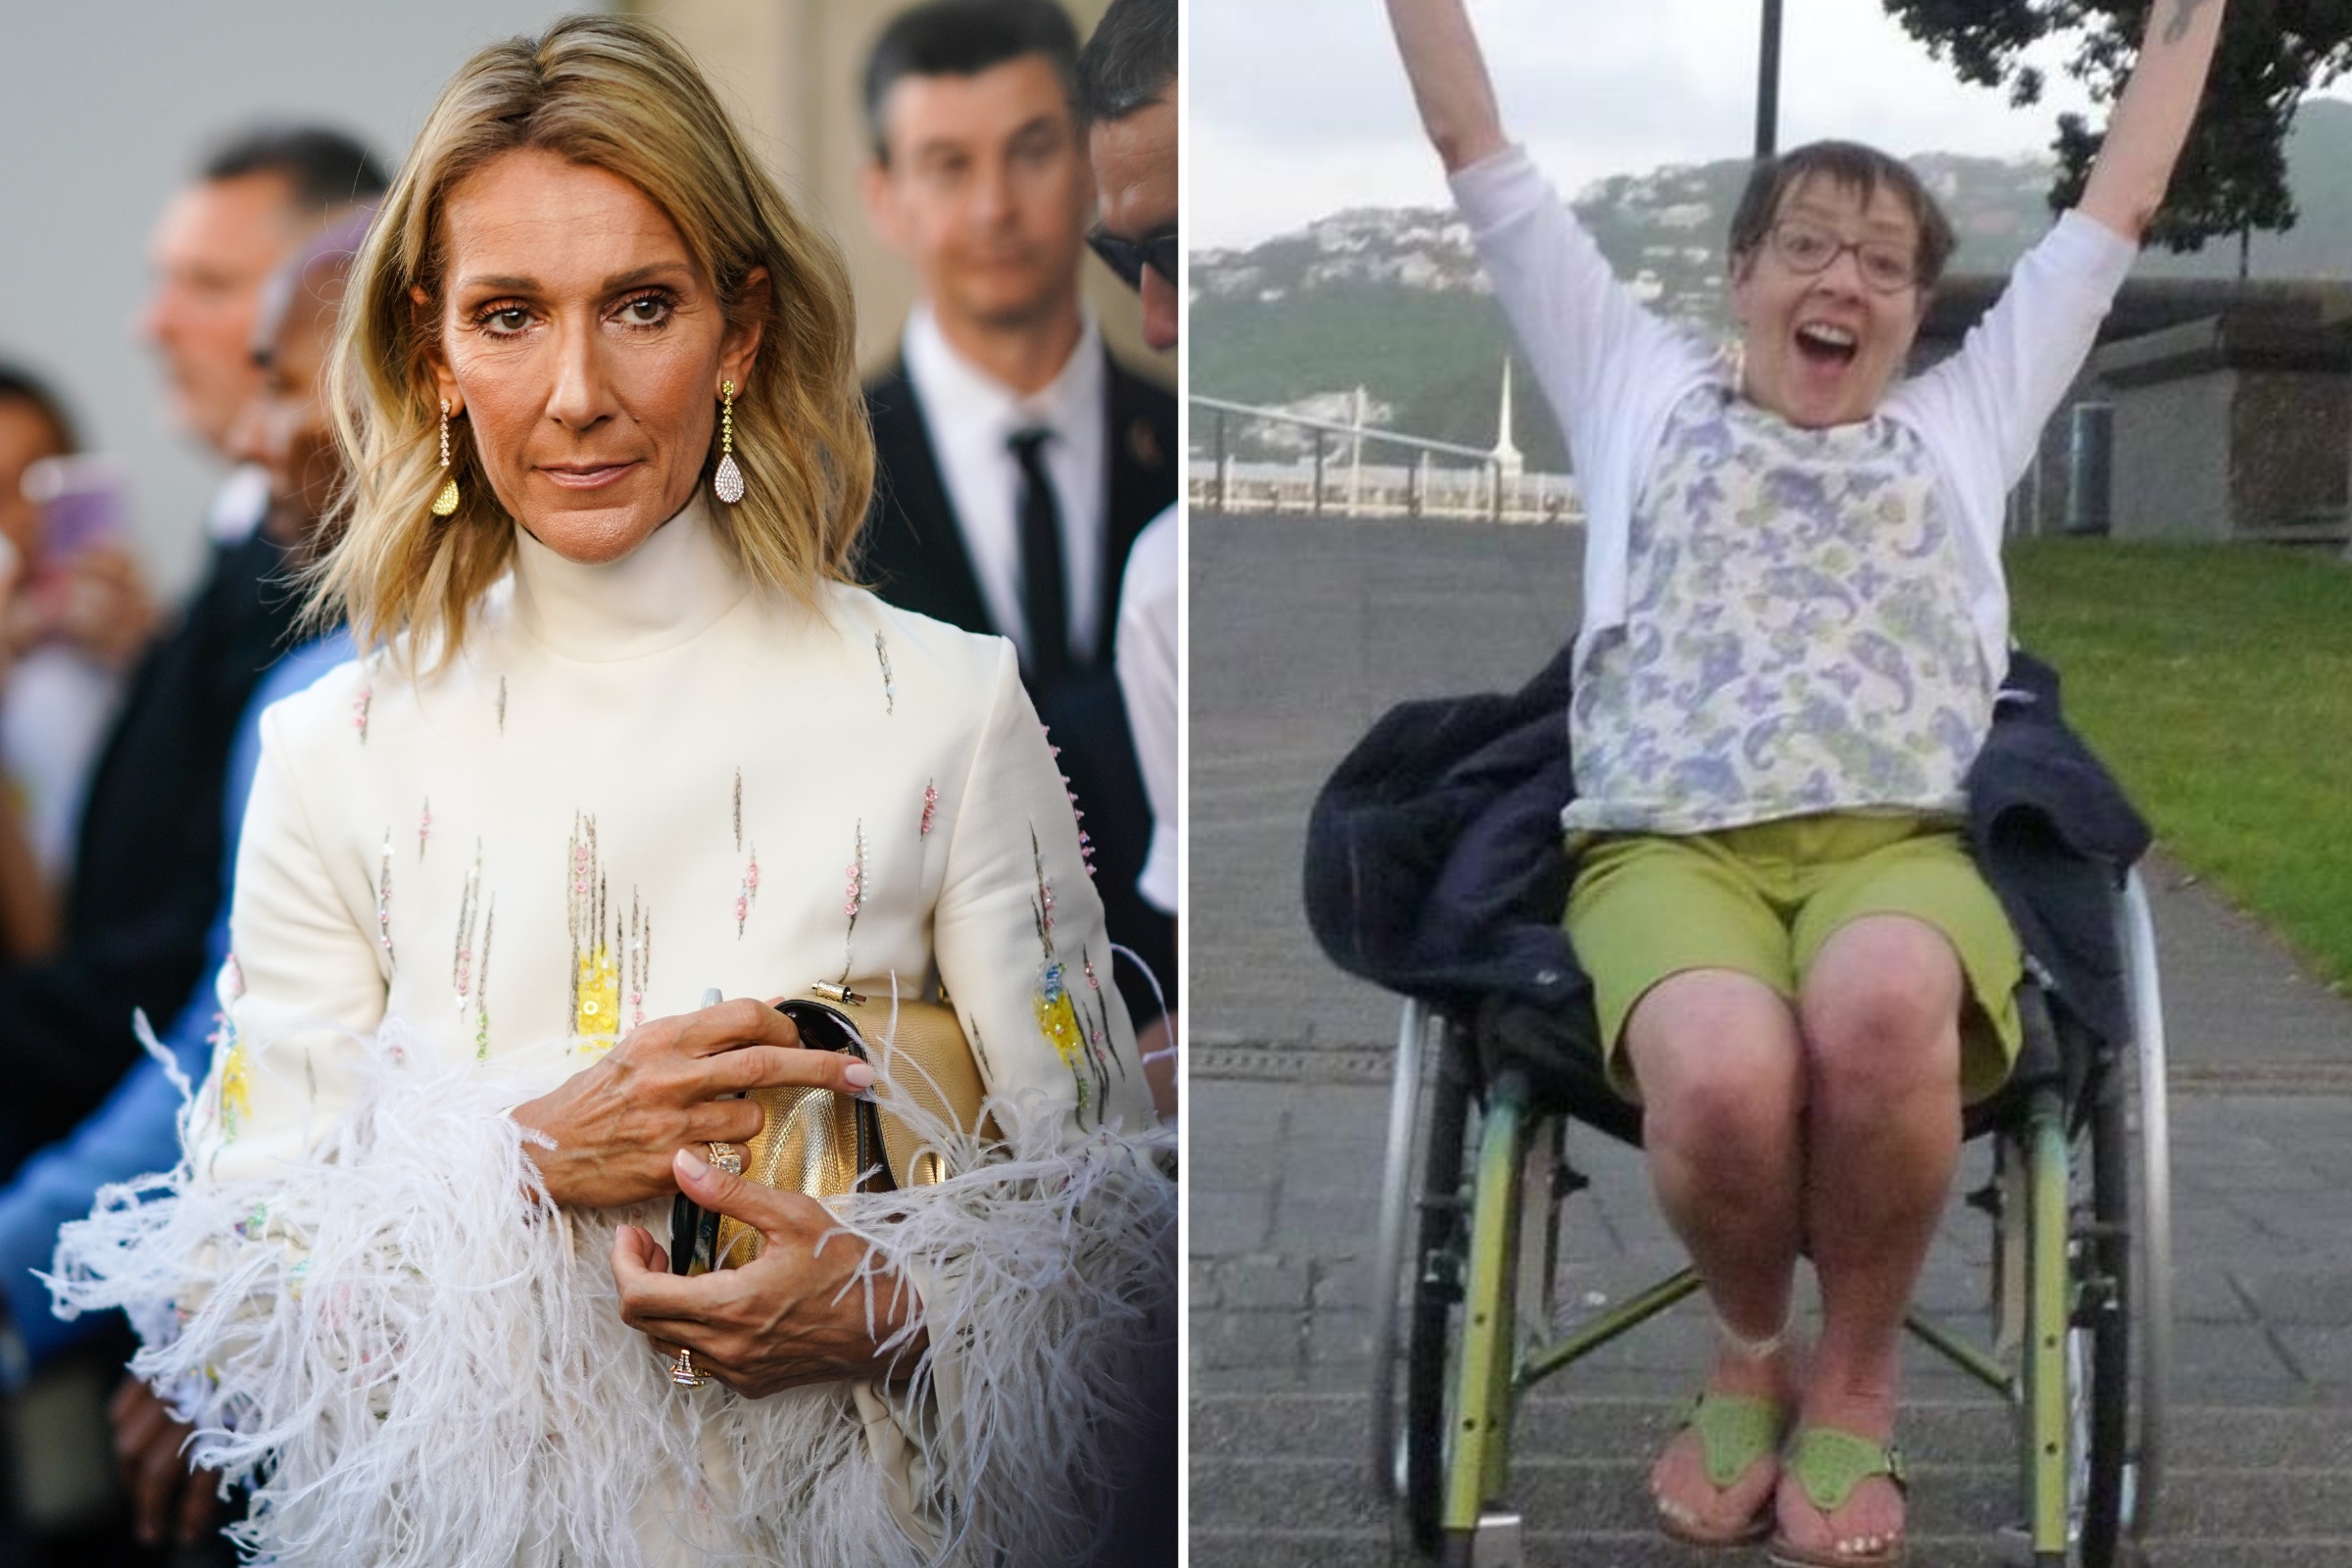 'Like Celine Dion, I Have Stiff Person Syndrome'